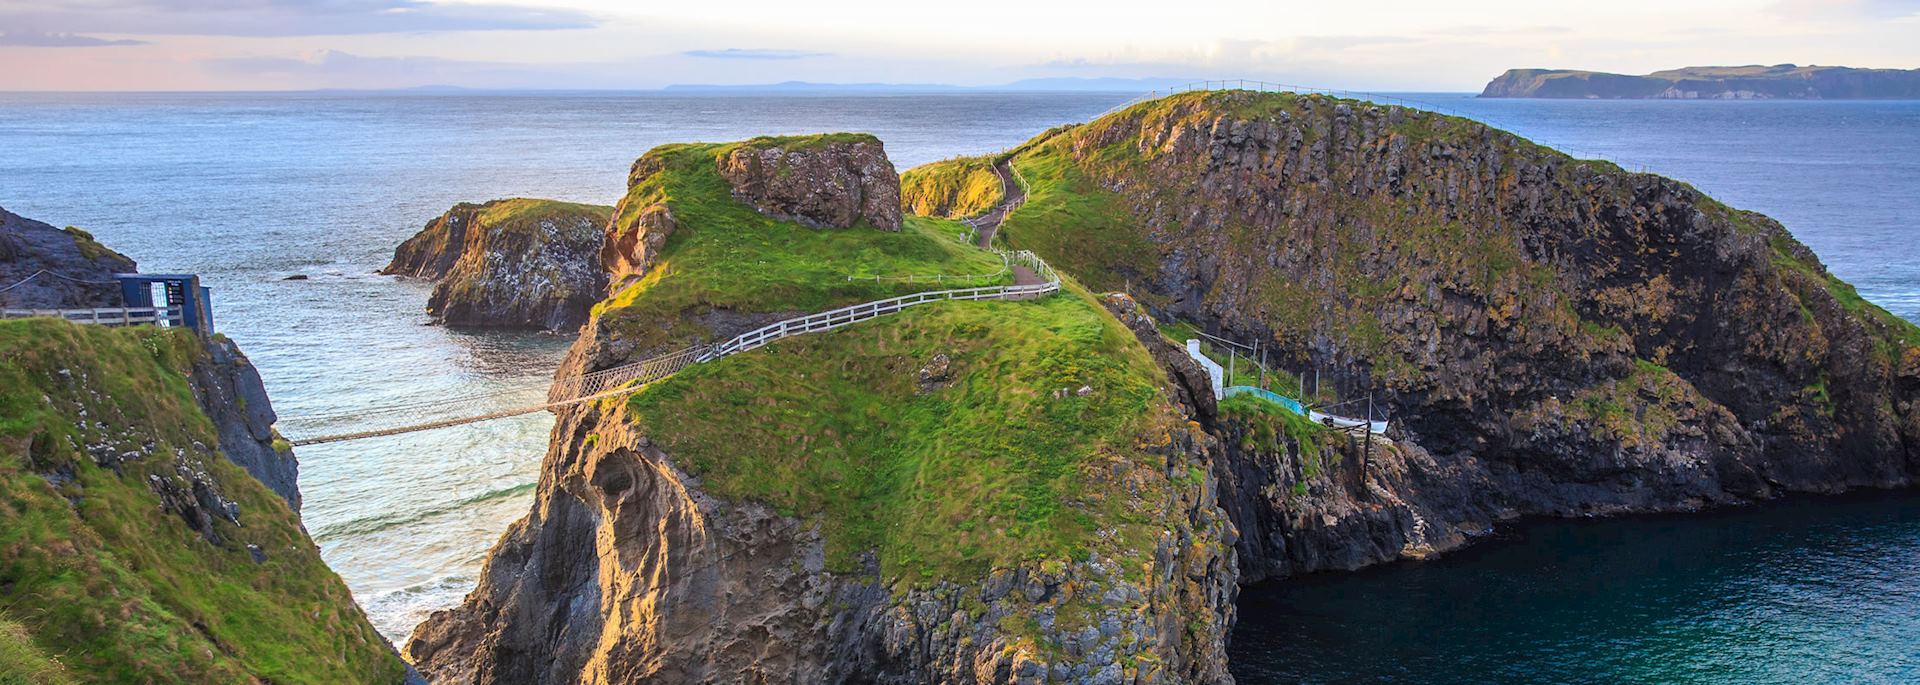 Carrick-a-Rede Rope Bridge, near Ballintoy in County Antrim